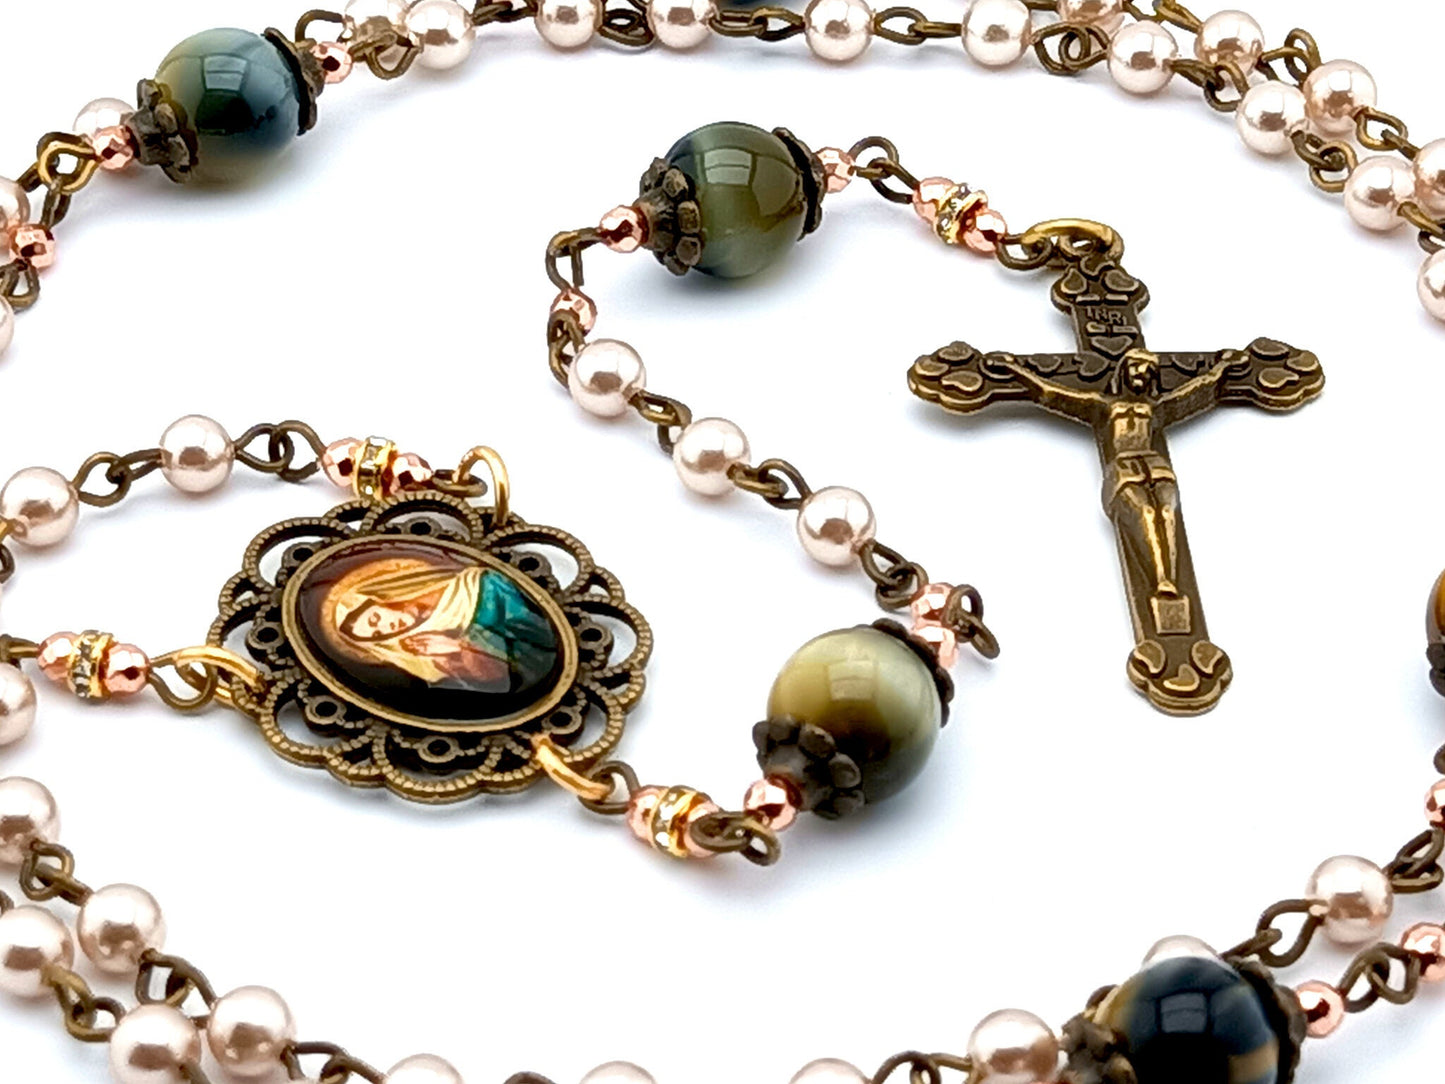 Blessed Virgin Mary unique rosary beads with pearl and tigers eye gemstone beads, bronze crucifix and picture centre medal.